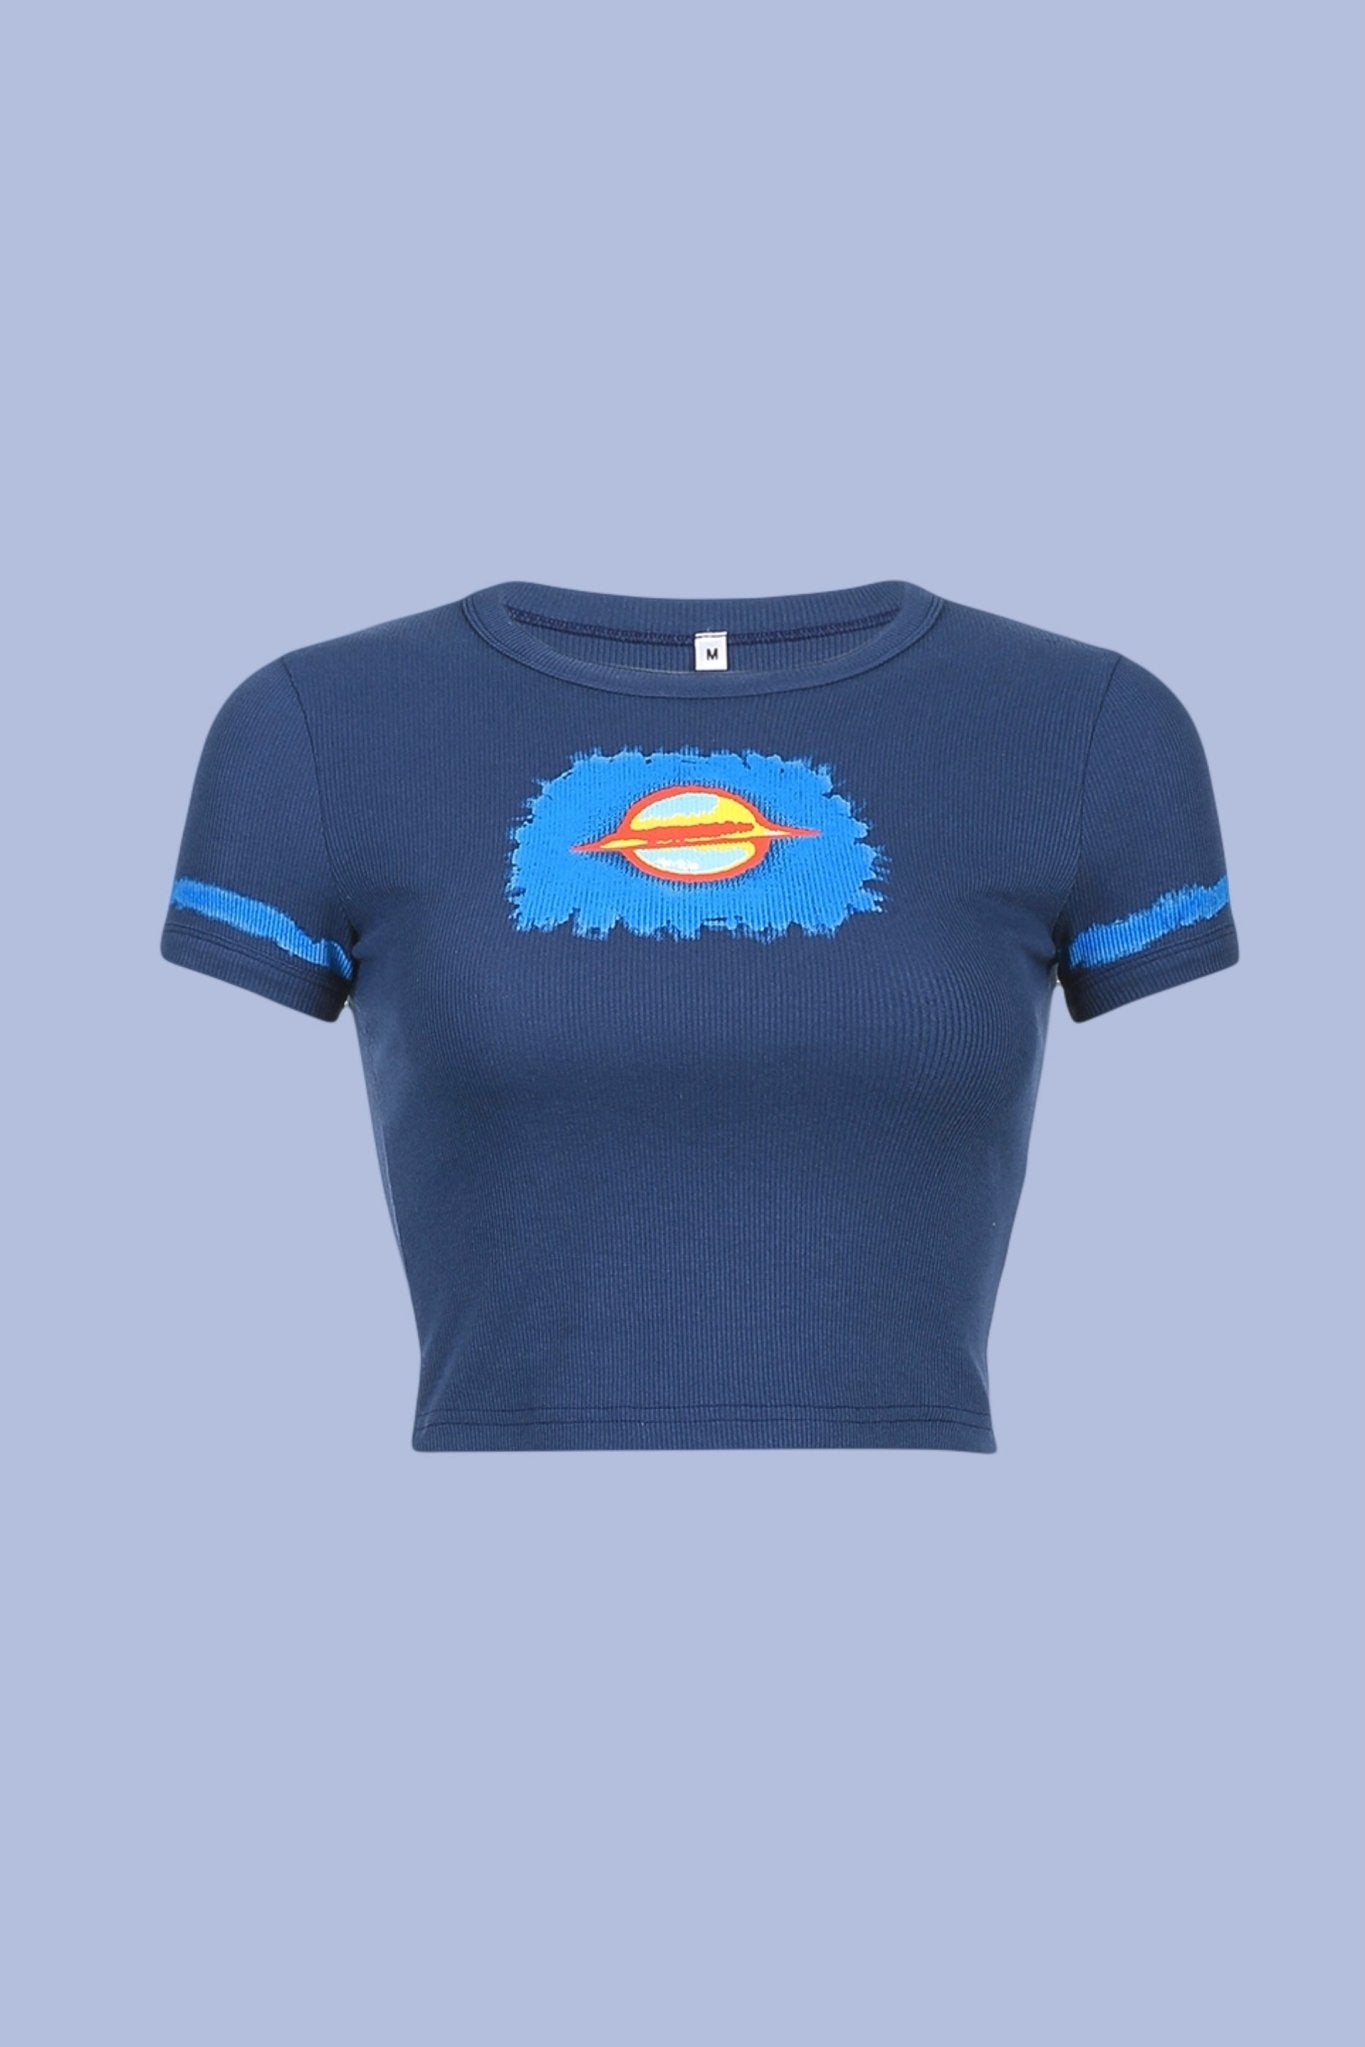 Planet baby tee - SCG_COLLECTIONS